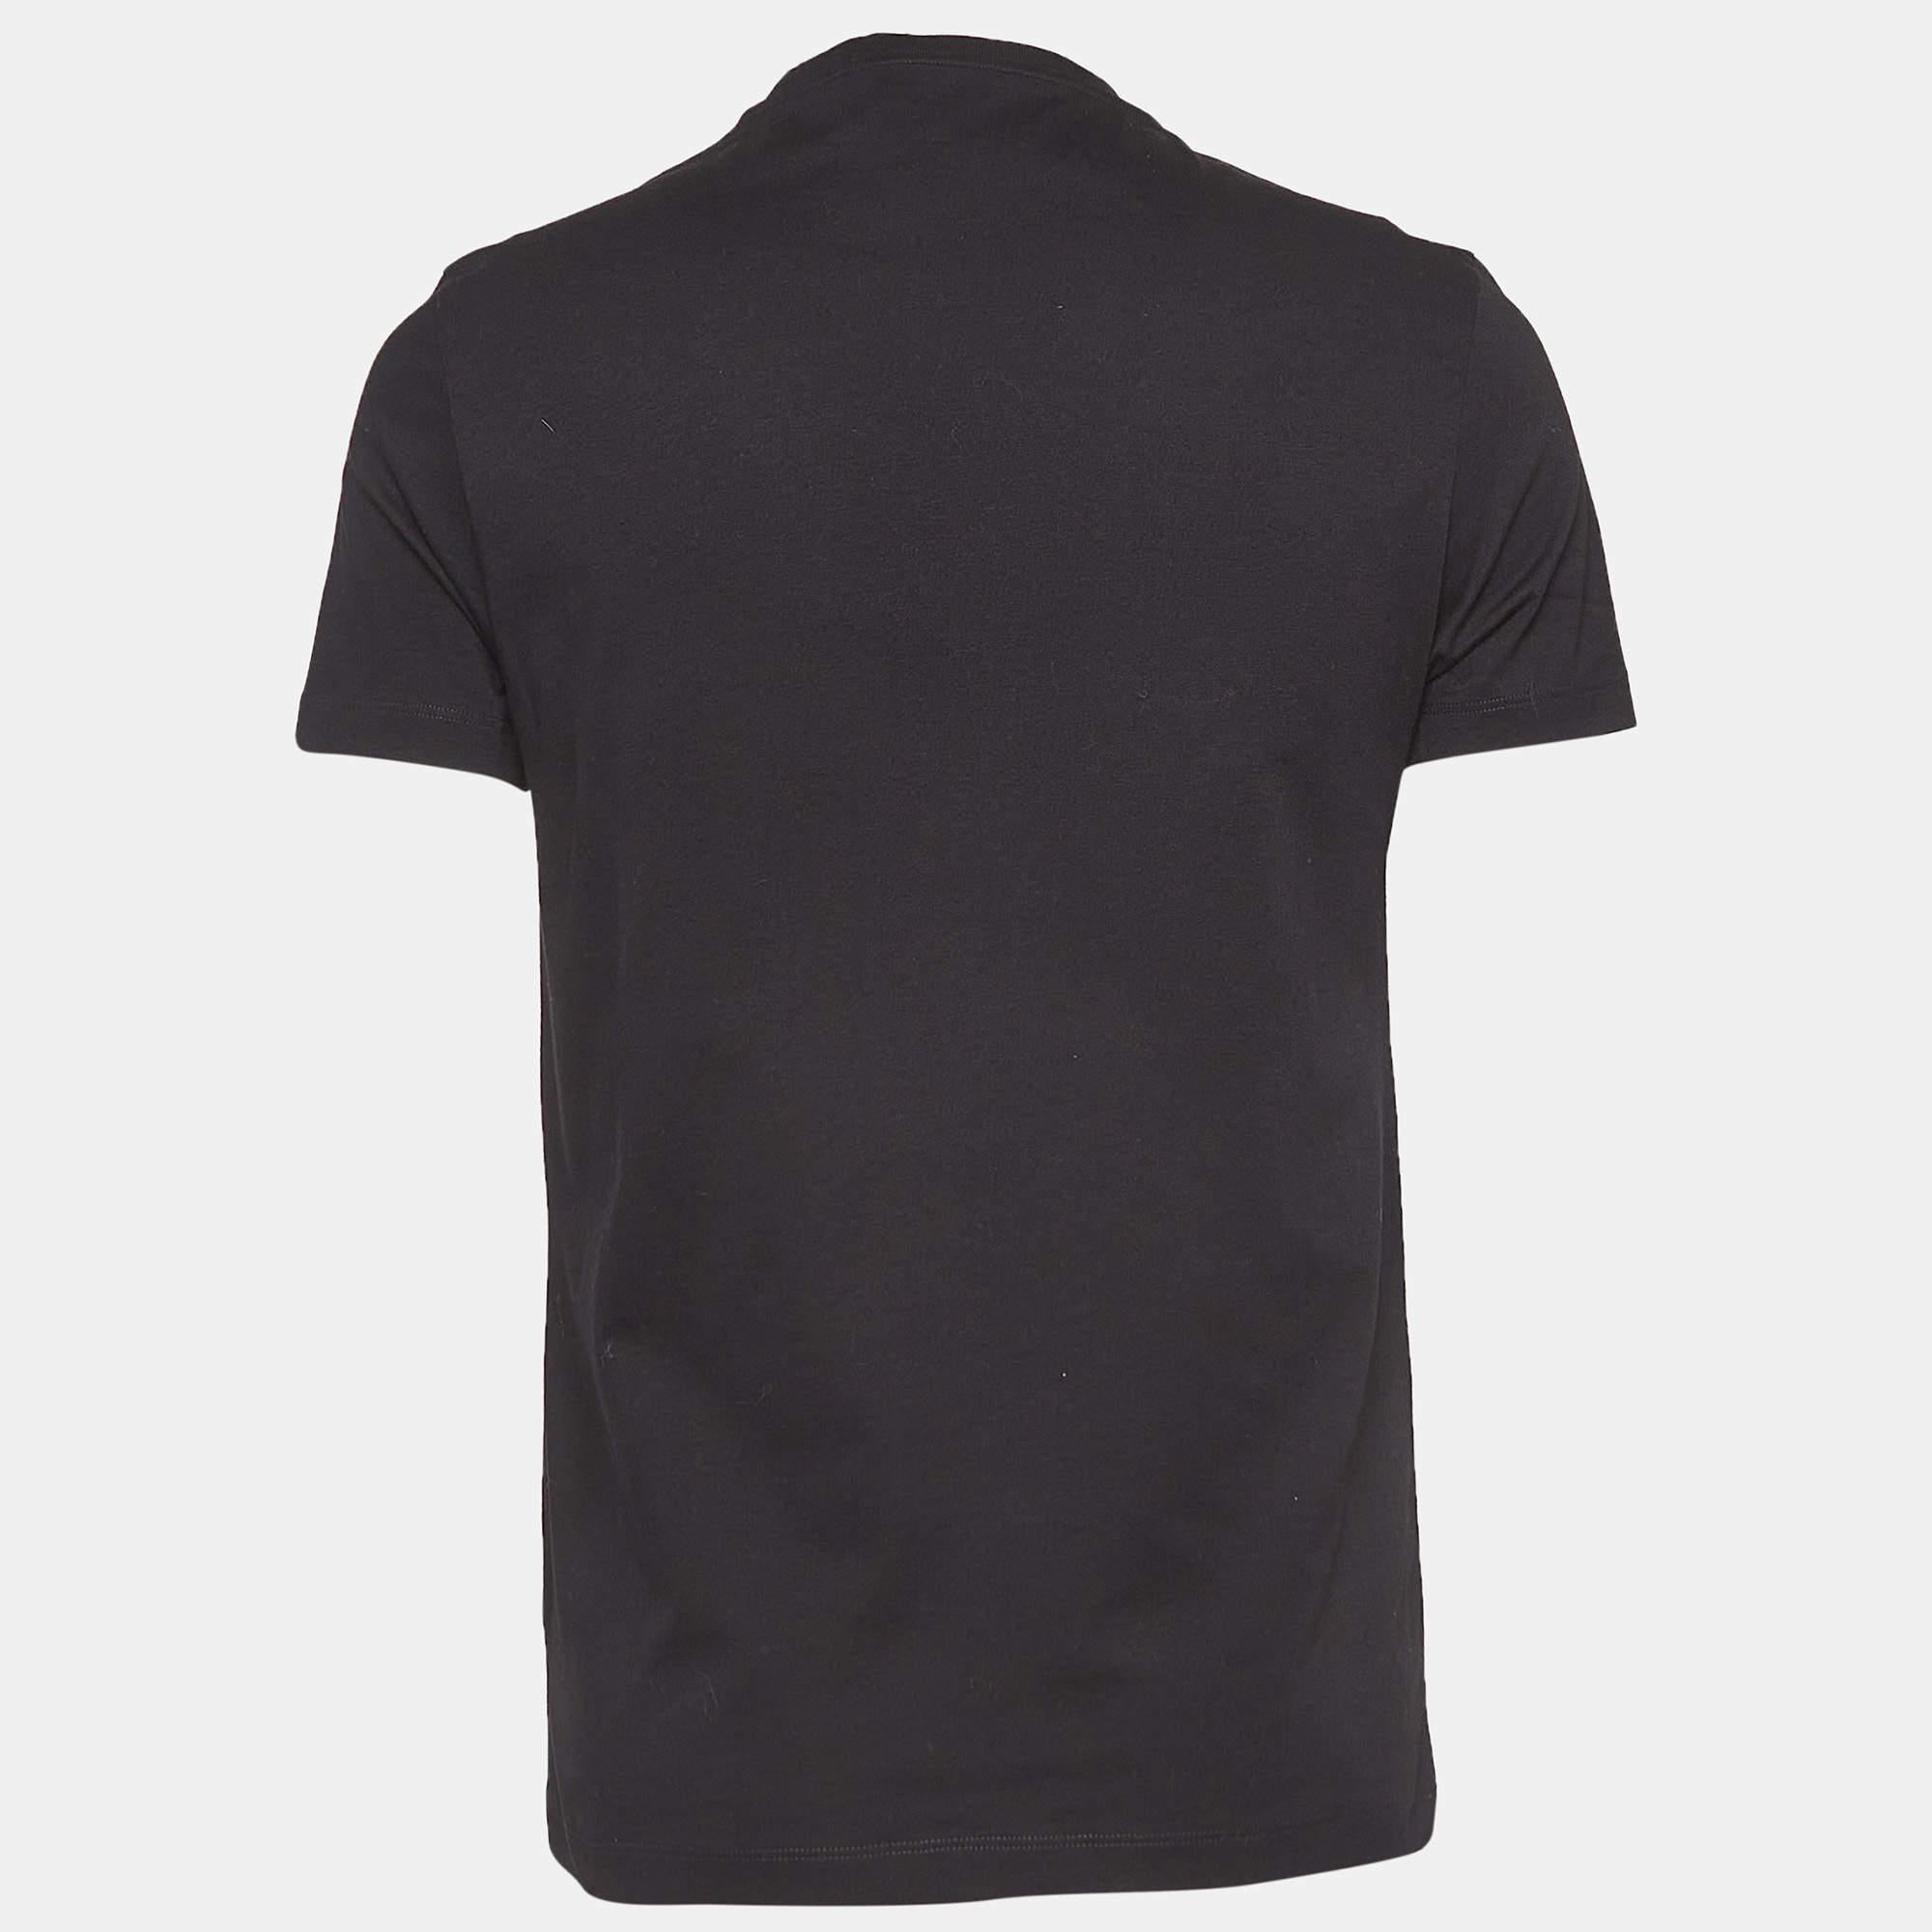 Perfect for casual outings or errands, this T-shirt is the best piece to feel comfortable and stylish in. It flaunts a catchy shade and a relaxed fit.

Includes: brand tag